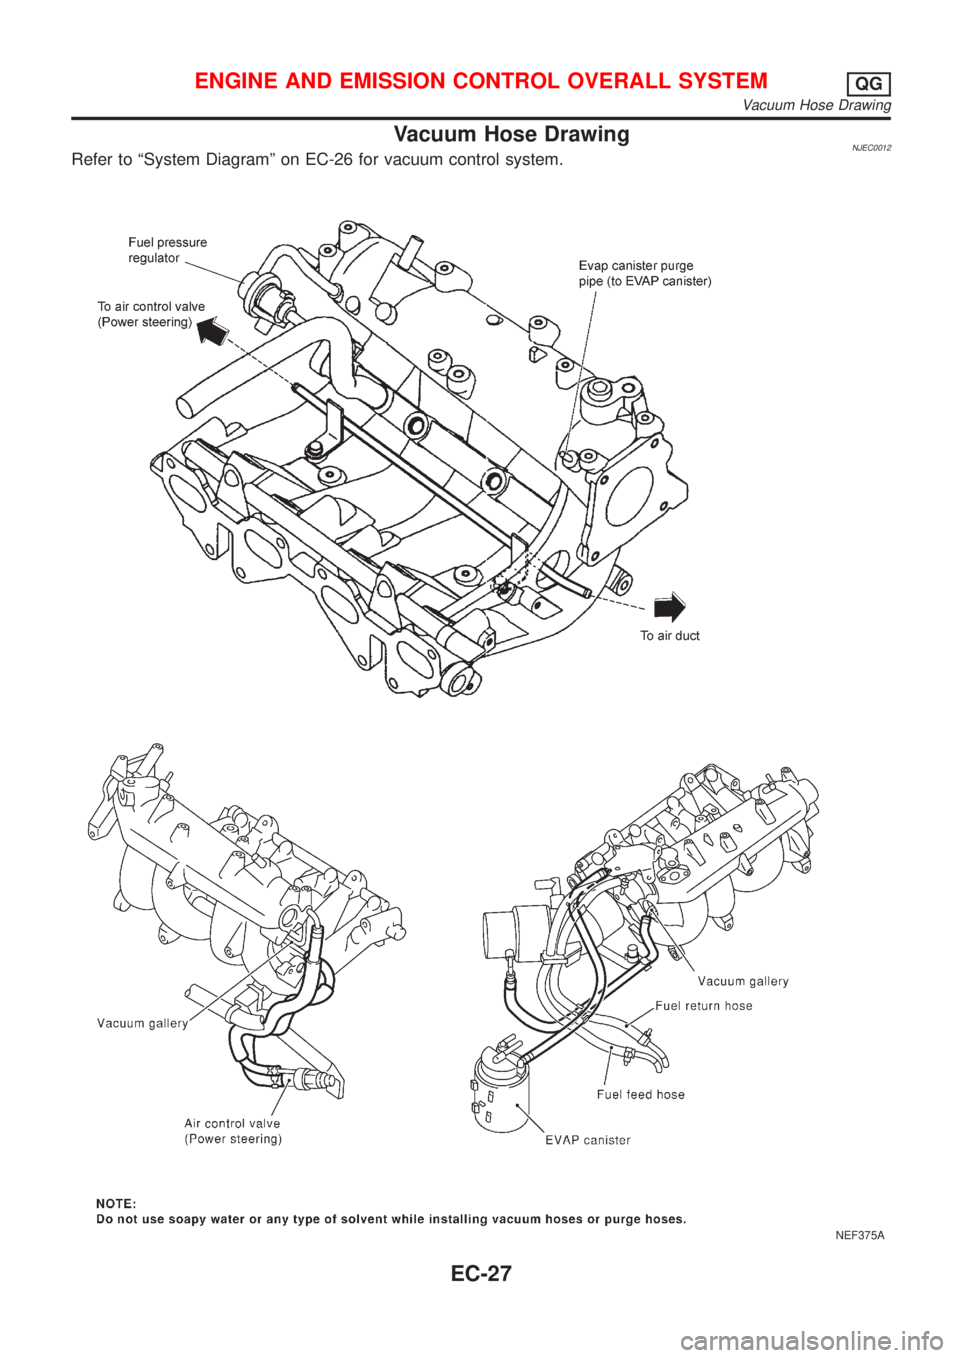 NISSAN ALMERA N16 2001  Electronic Owners Manual Vacuum Hose DrawingNJEC0012Refer to ªSystem Diagramº on EC-26 for vacuum control system.
NEF375A
ENGINE AND EMISSION CONTROL OVERALL SYSTEMQG
Vacuum Hose Drawing
EC-27 